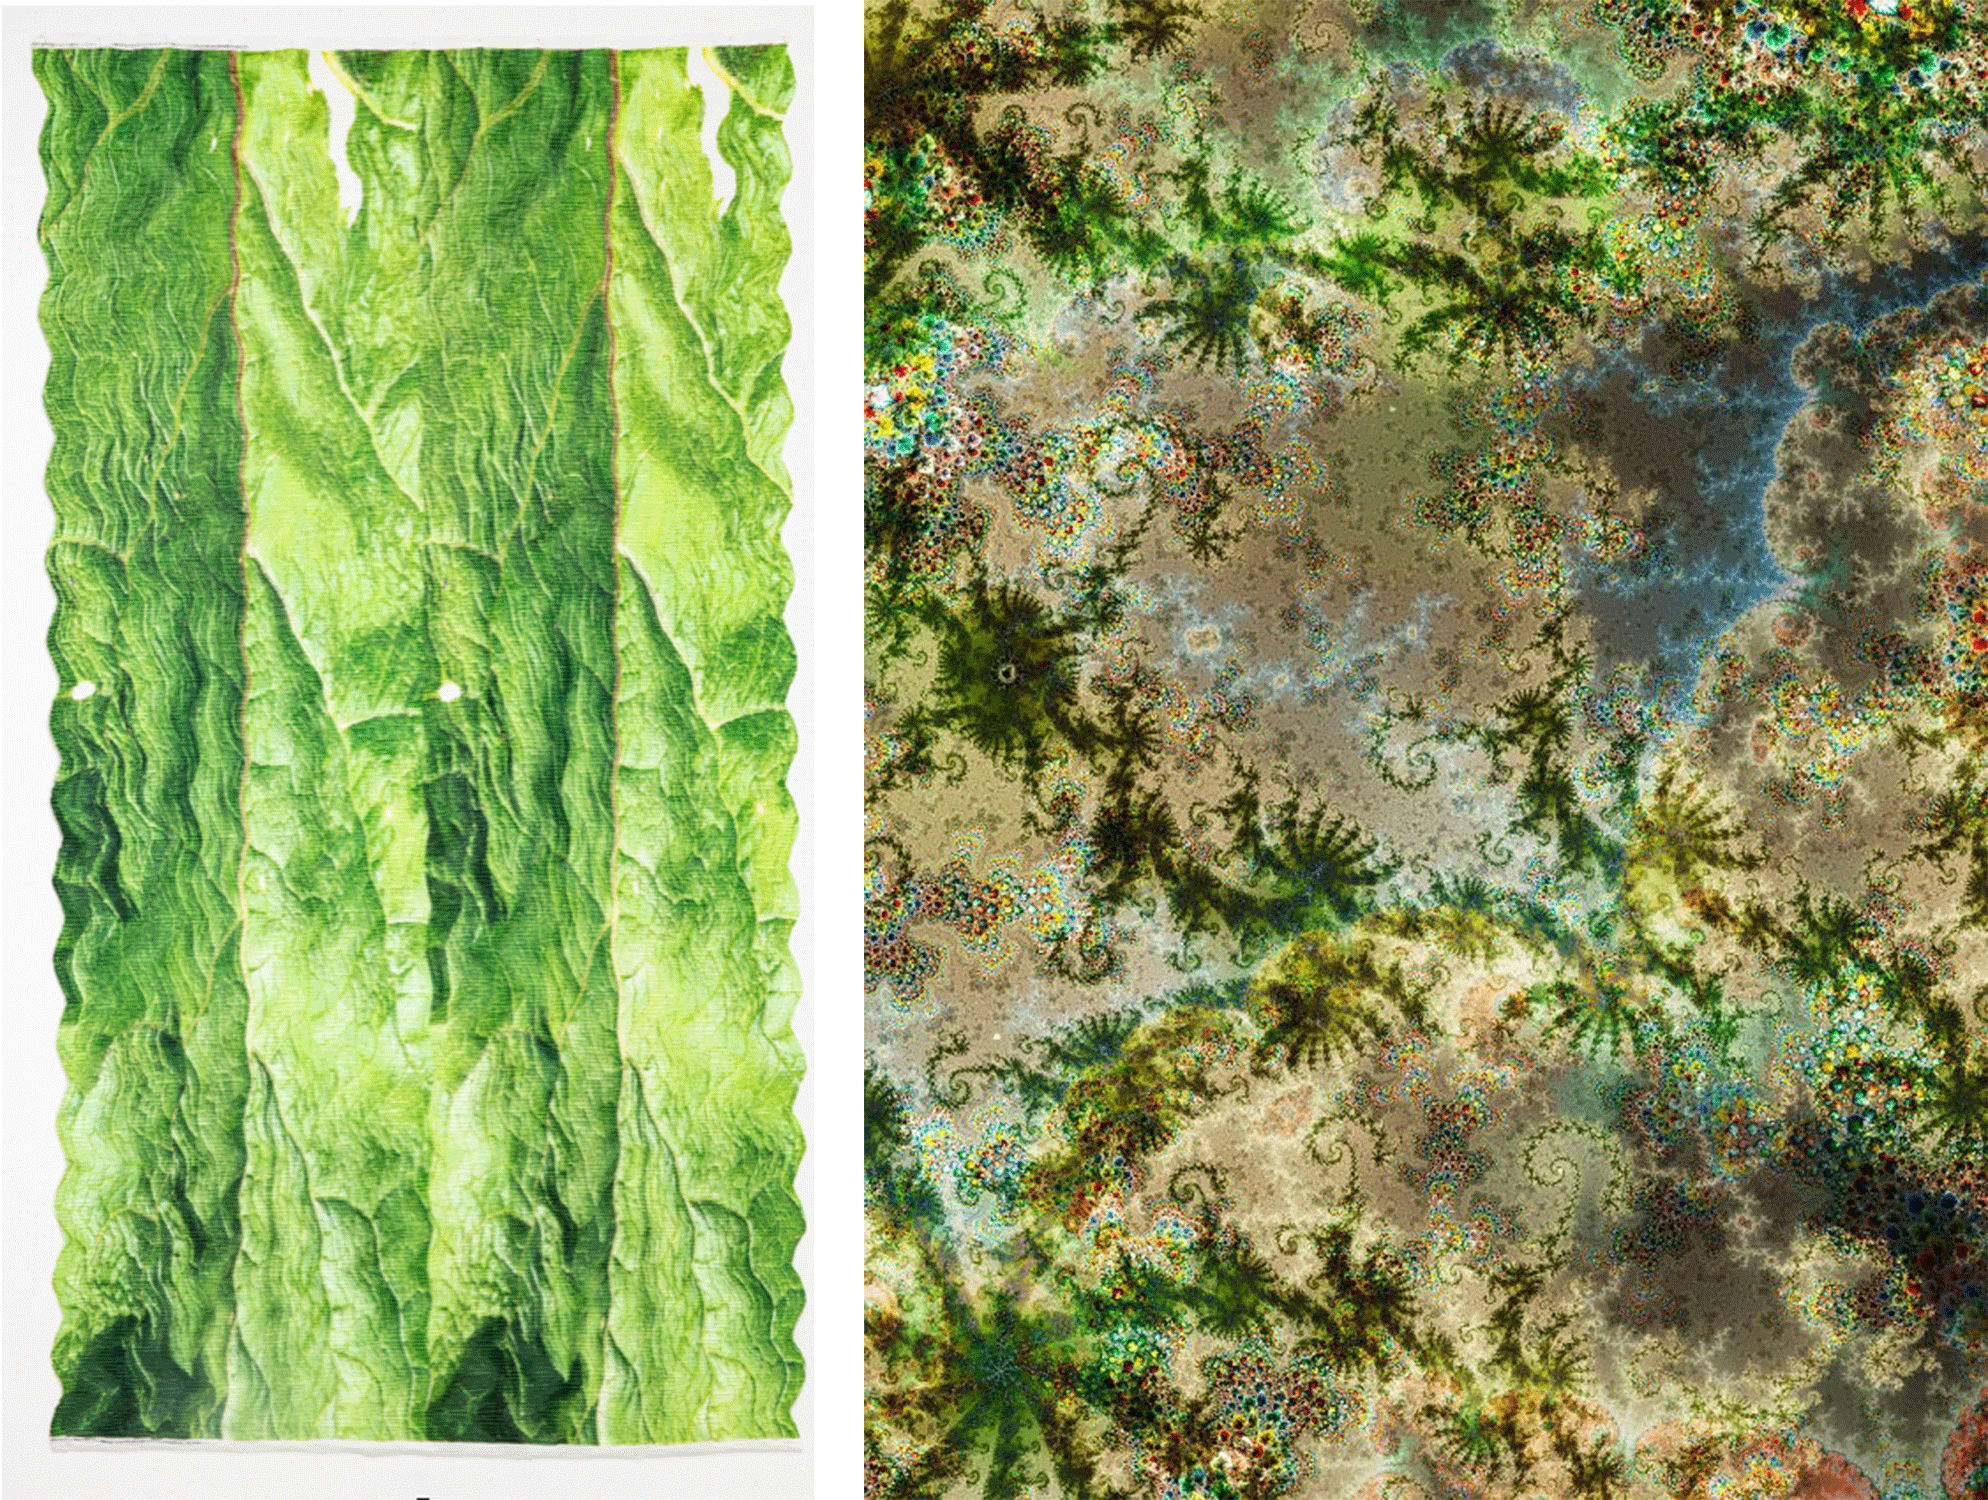 Left: Alice Channer, Soft Sediment Deformation, Photosynthesising Body (Double S t r e t c h e d Fleshy), 2022. Courtesy of the artist and Konrad Fischer Galerie. Right: Thomas Ruff, d.o.p.e. 09 II, 2022. Courtesy of the artist and Konrad Fischer Galerie.